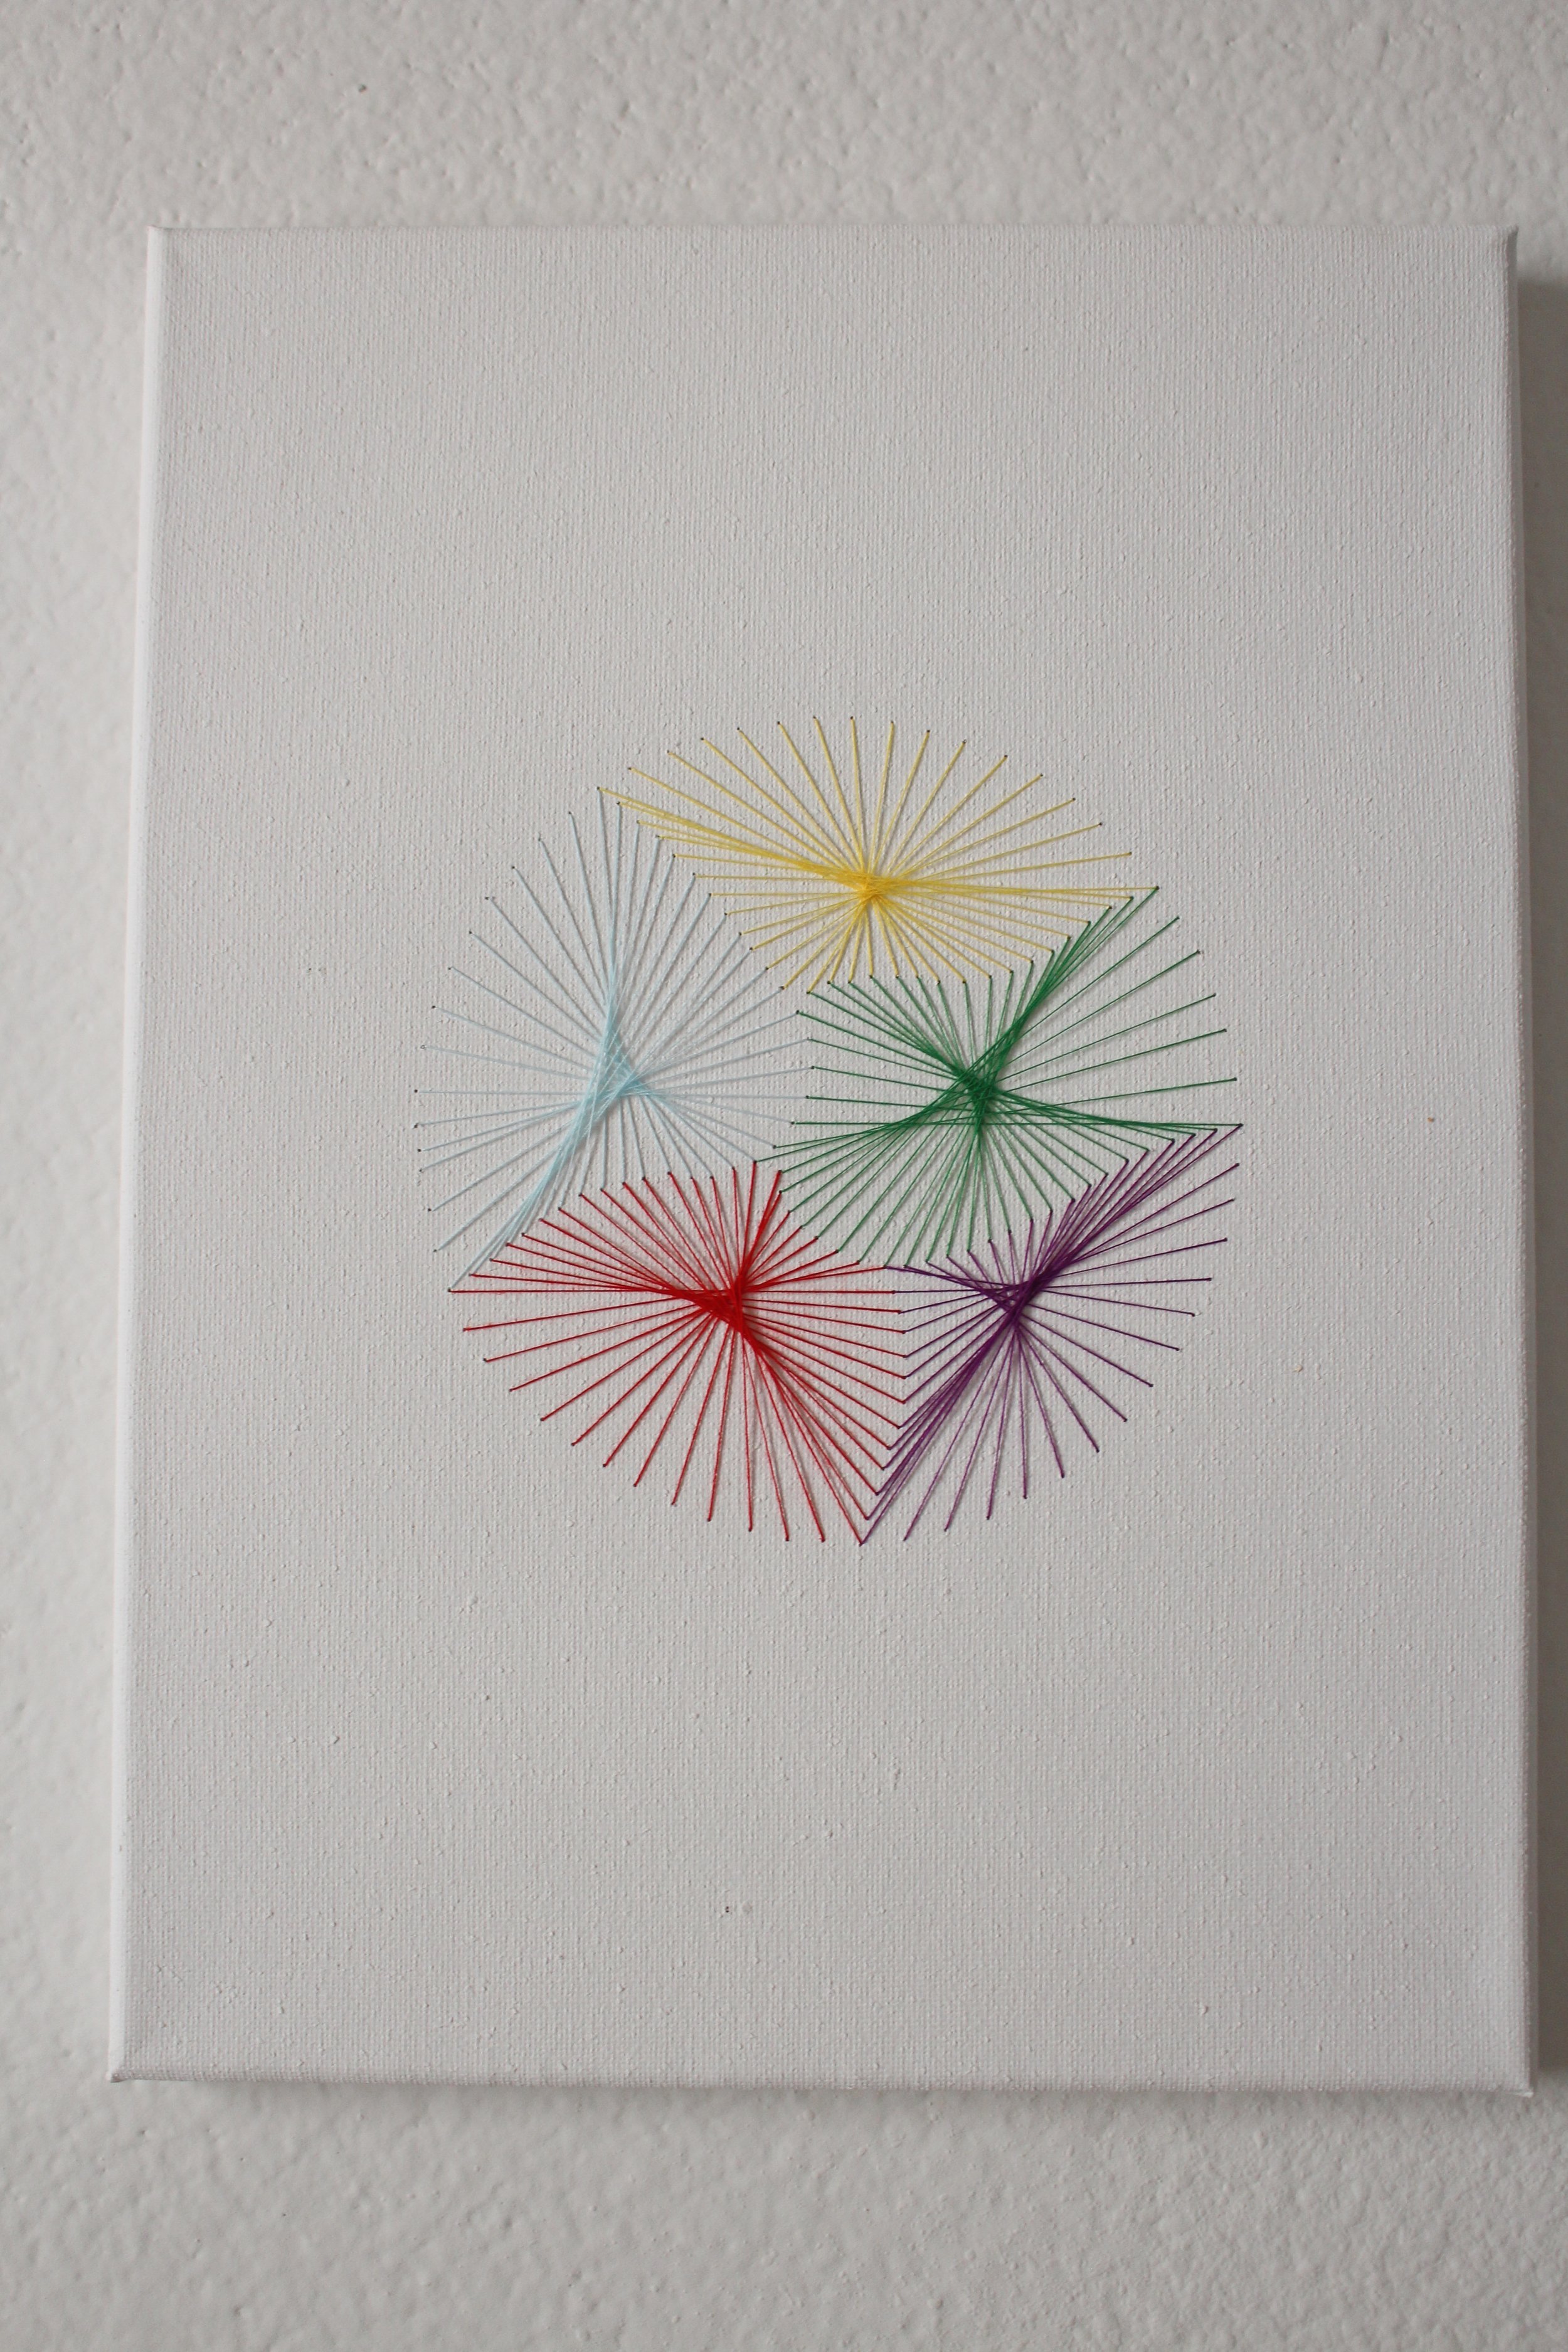  Red, blue, green, yellow, and purple threads sewn into a canvas in the shape of a ball 